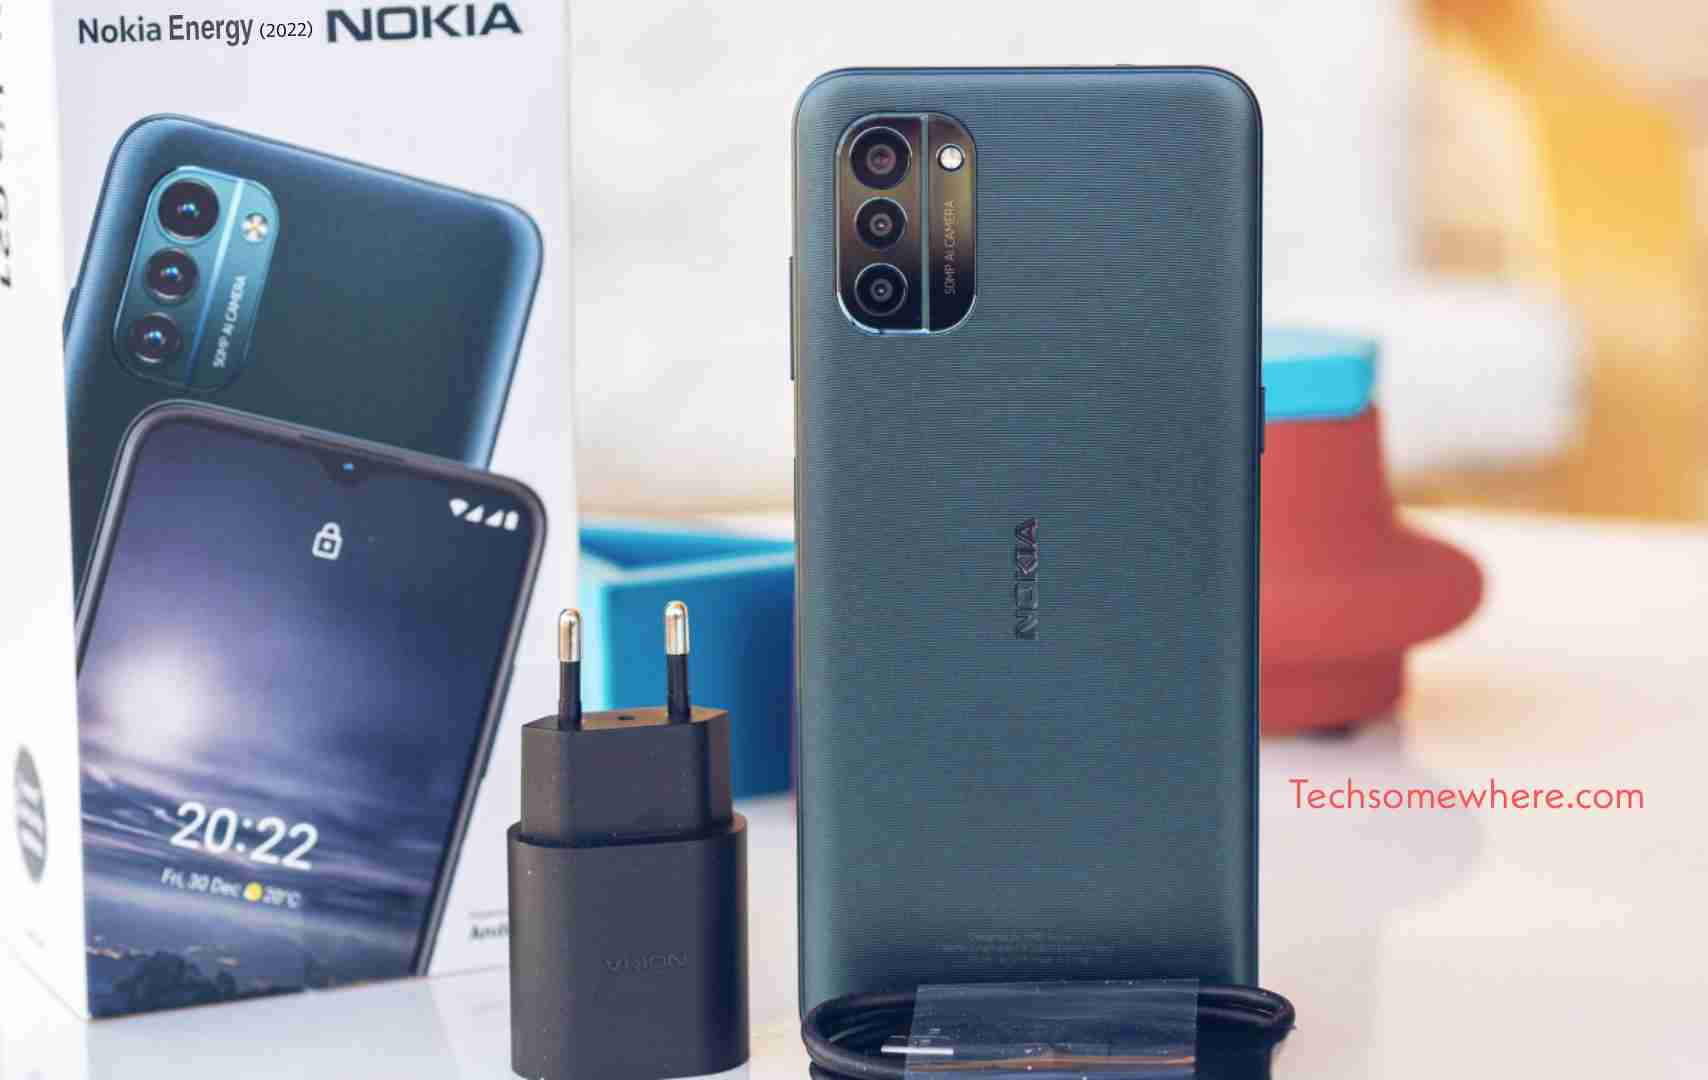 Nokia Energy 2022 - Price, All Specifications & Release Date.